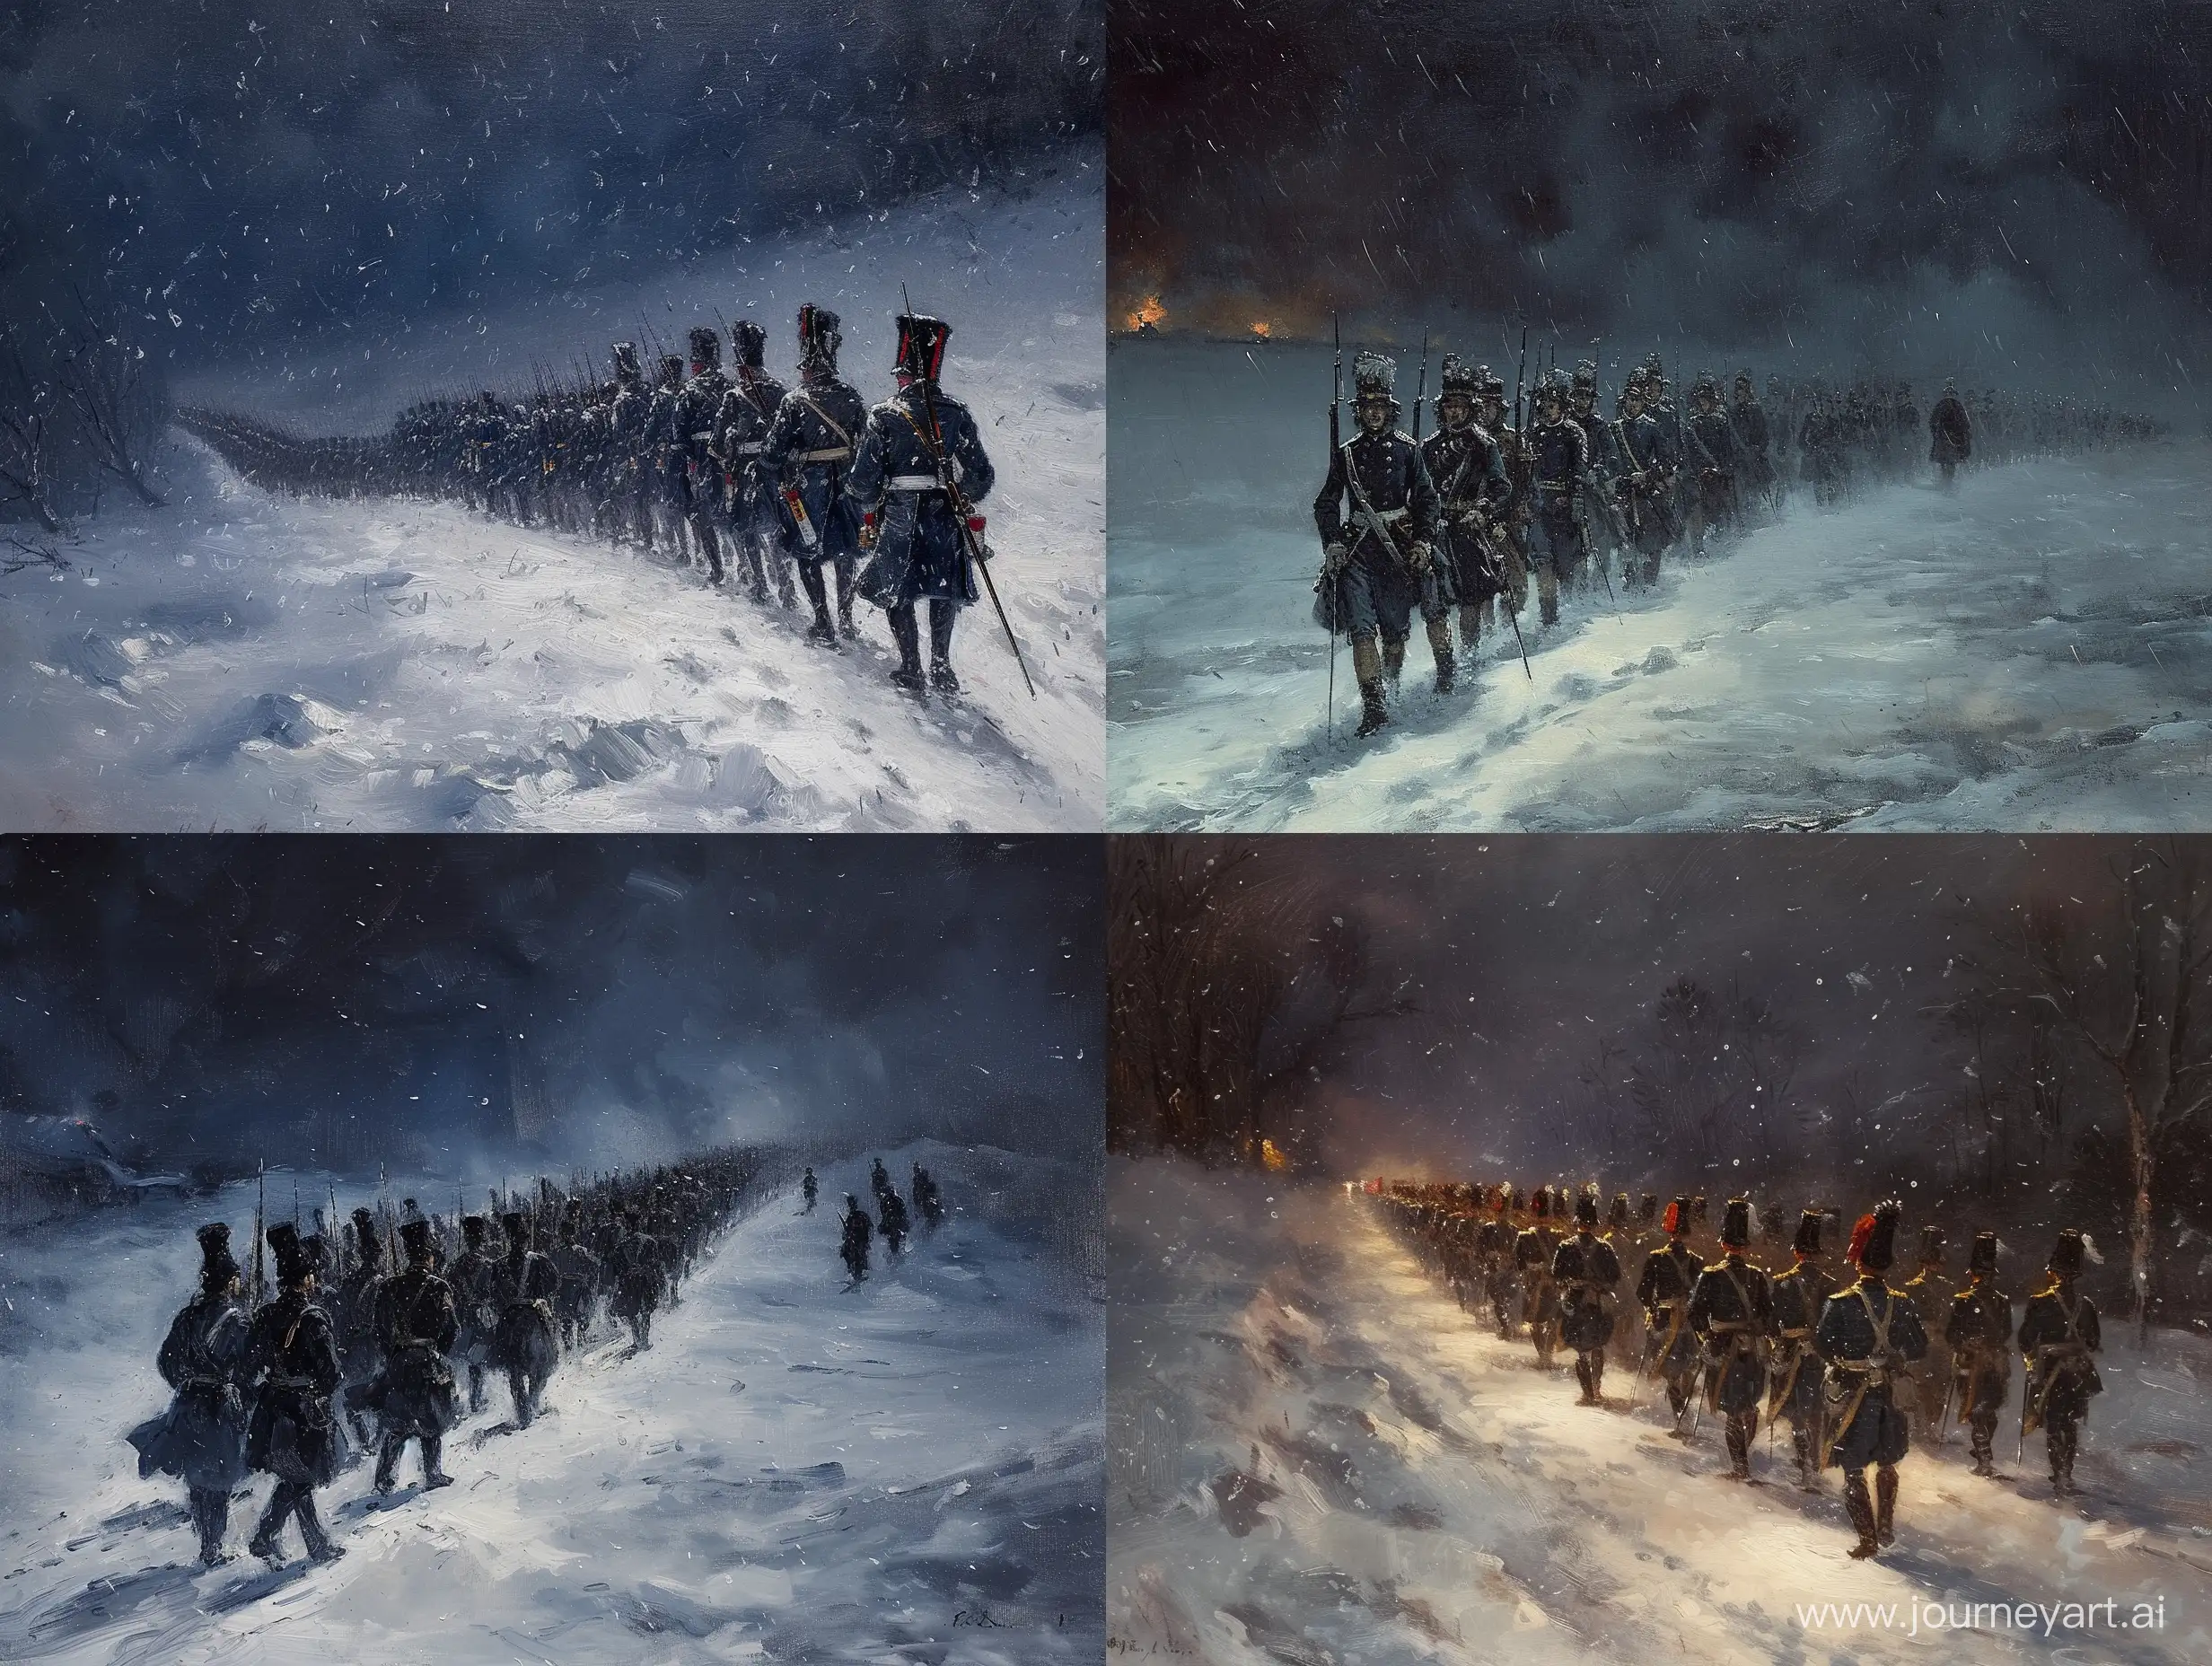 oil painting of a convoy of early 19th century french soldiers marching in the blizzard at night, low visibility